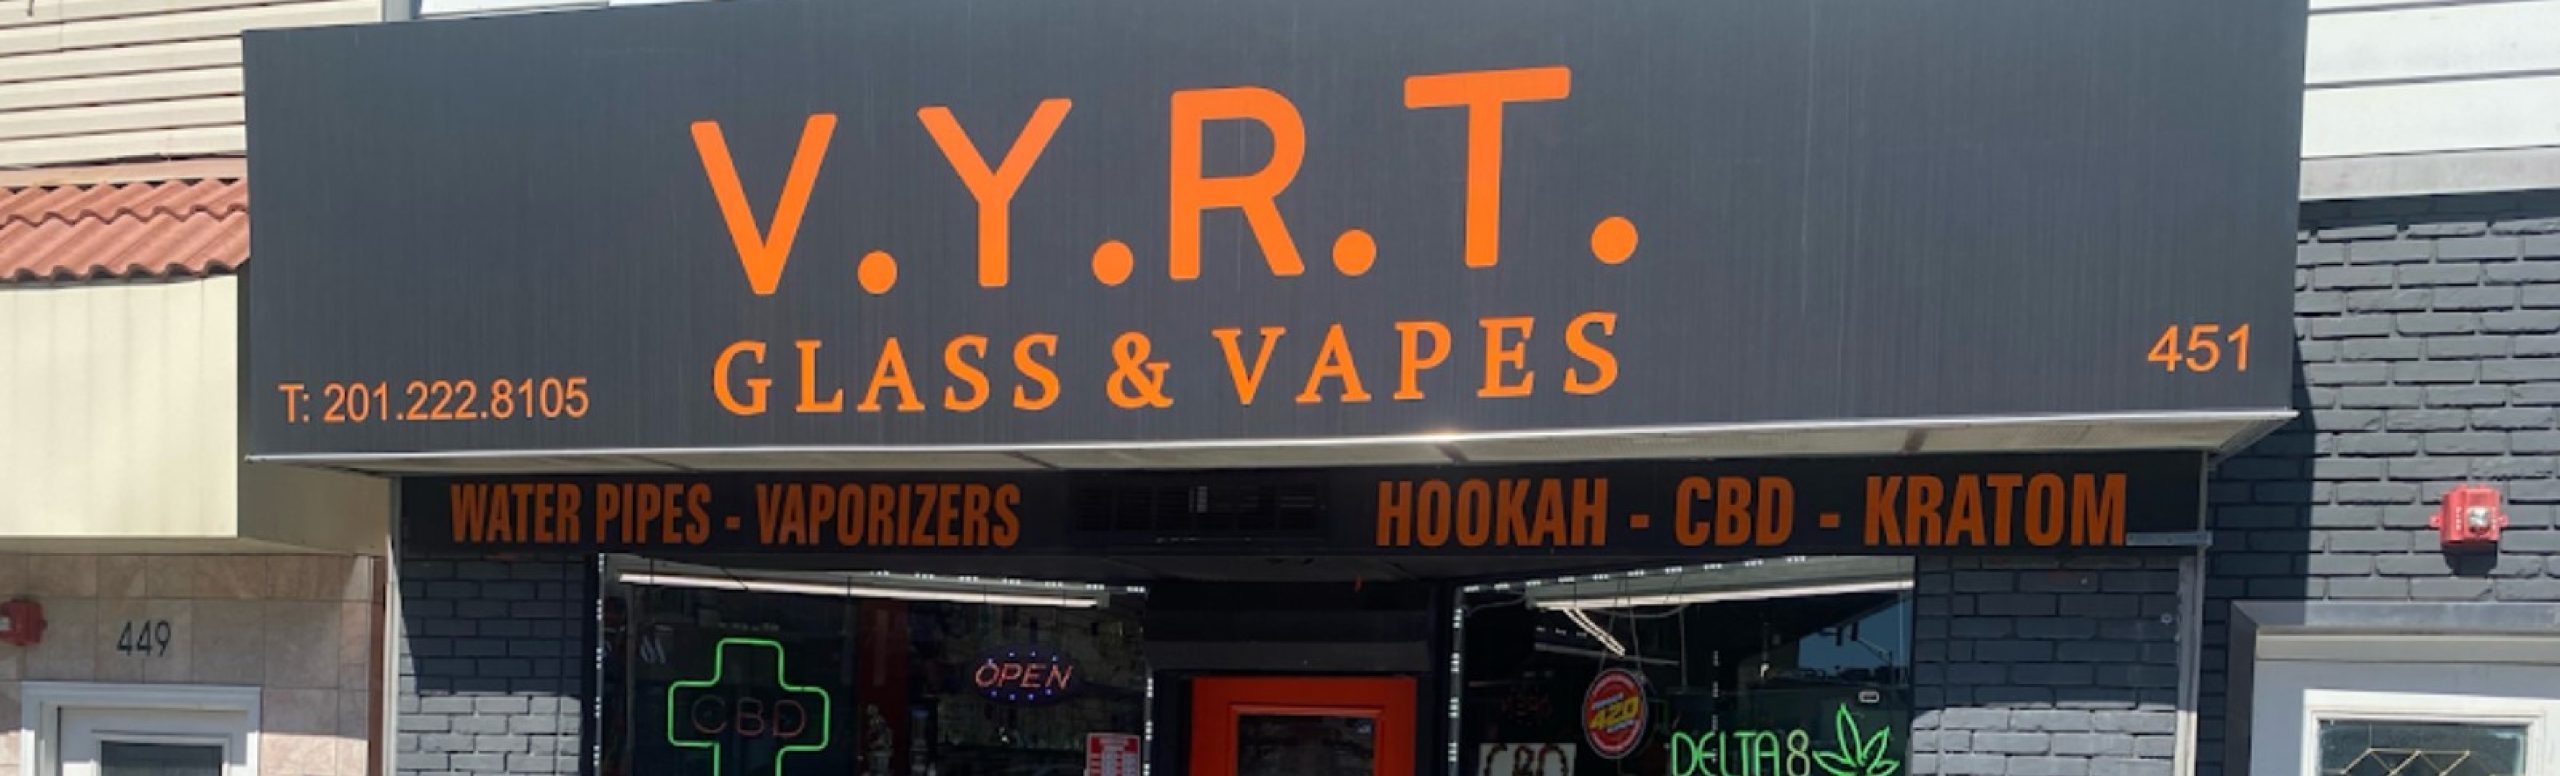 image of v.y.r.t glass and vapes in jersey city nj